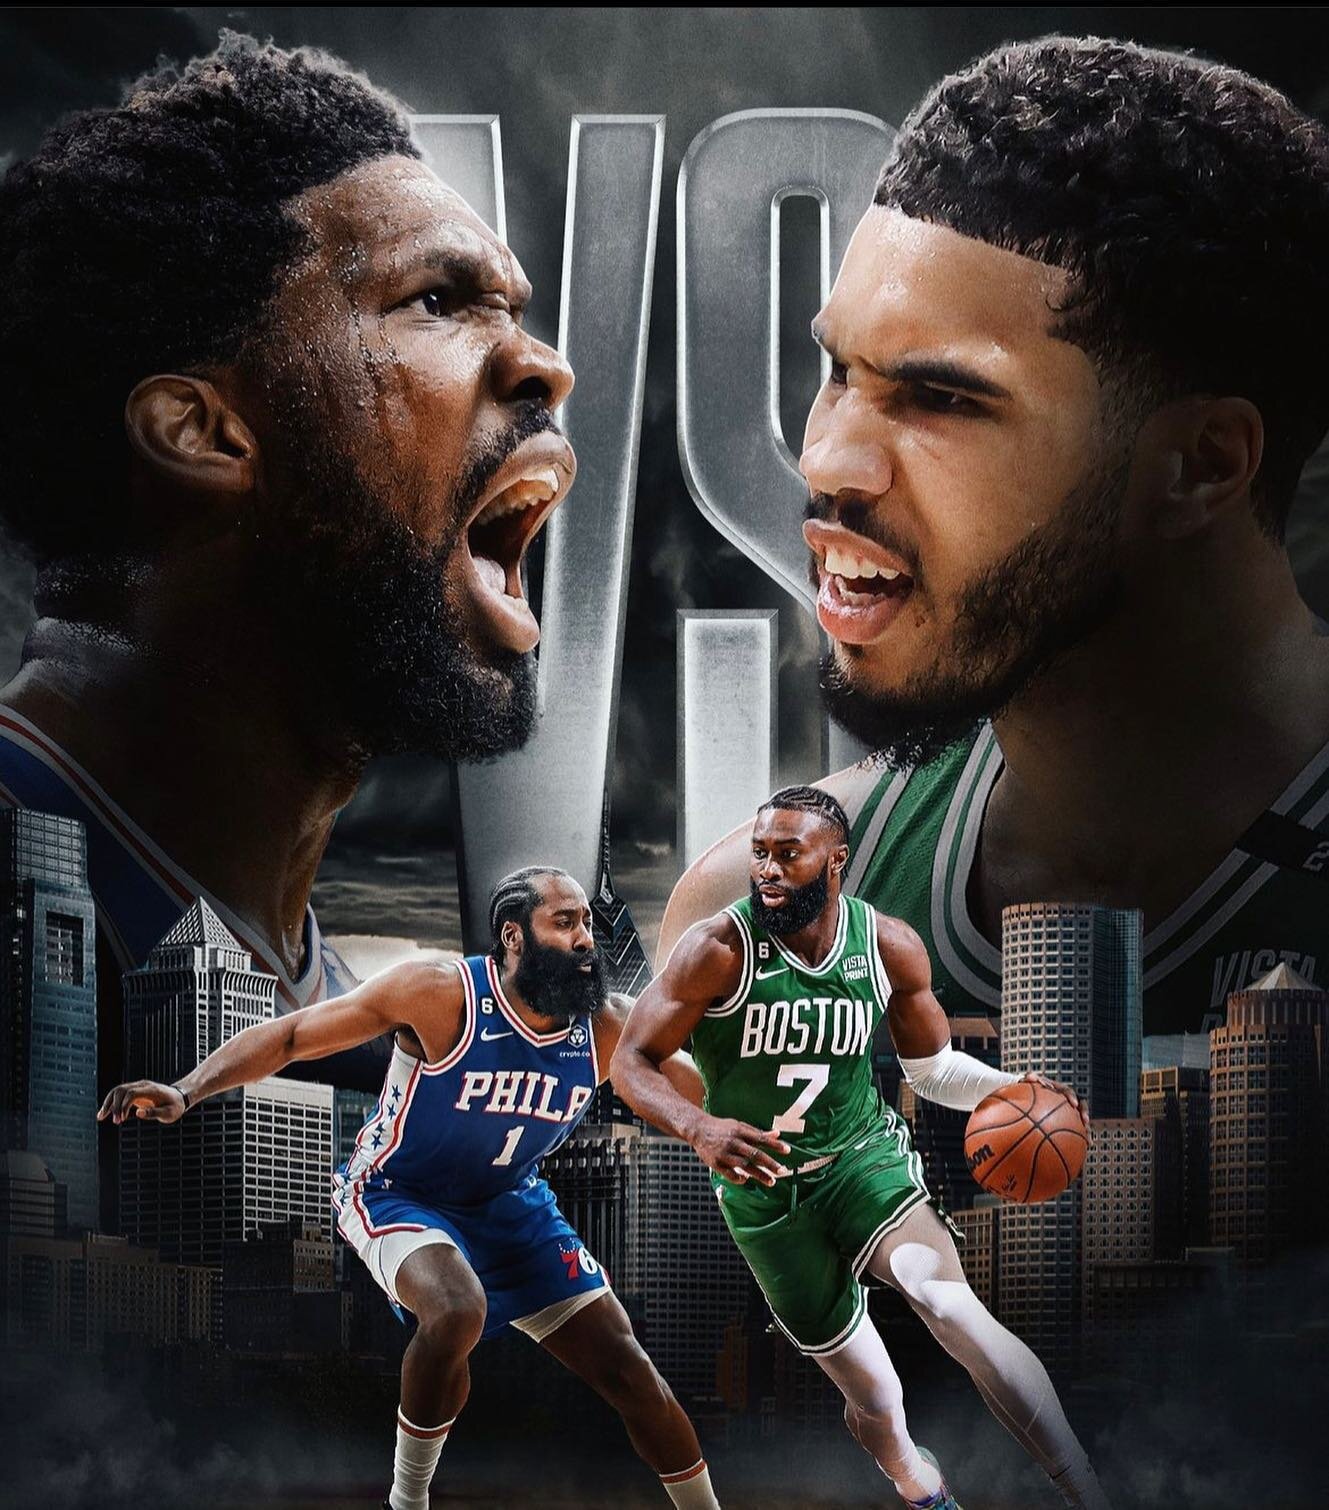 TONIGHT COME WATCH THE @sixers TAKE ON THE @celtics 🏀 🍻 ⚔️ 
Stop in or make your reservations now!
#crafthall #sixers #phillysports #phillylove